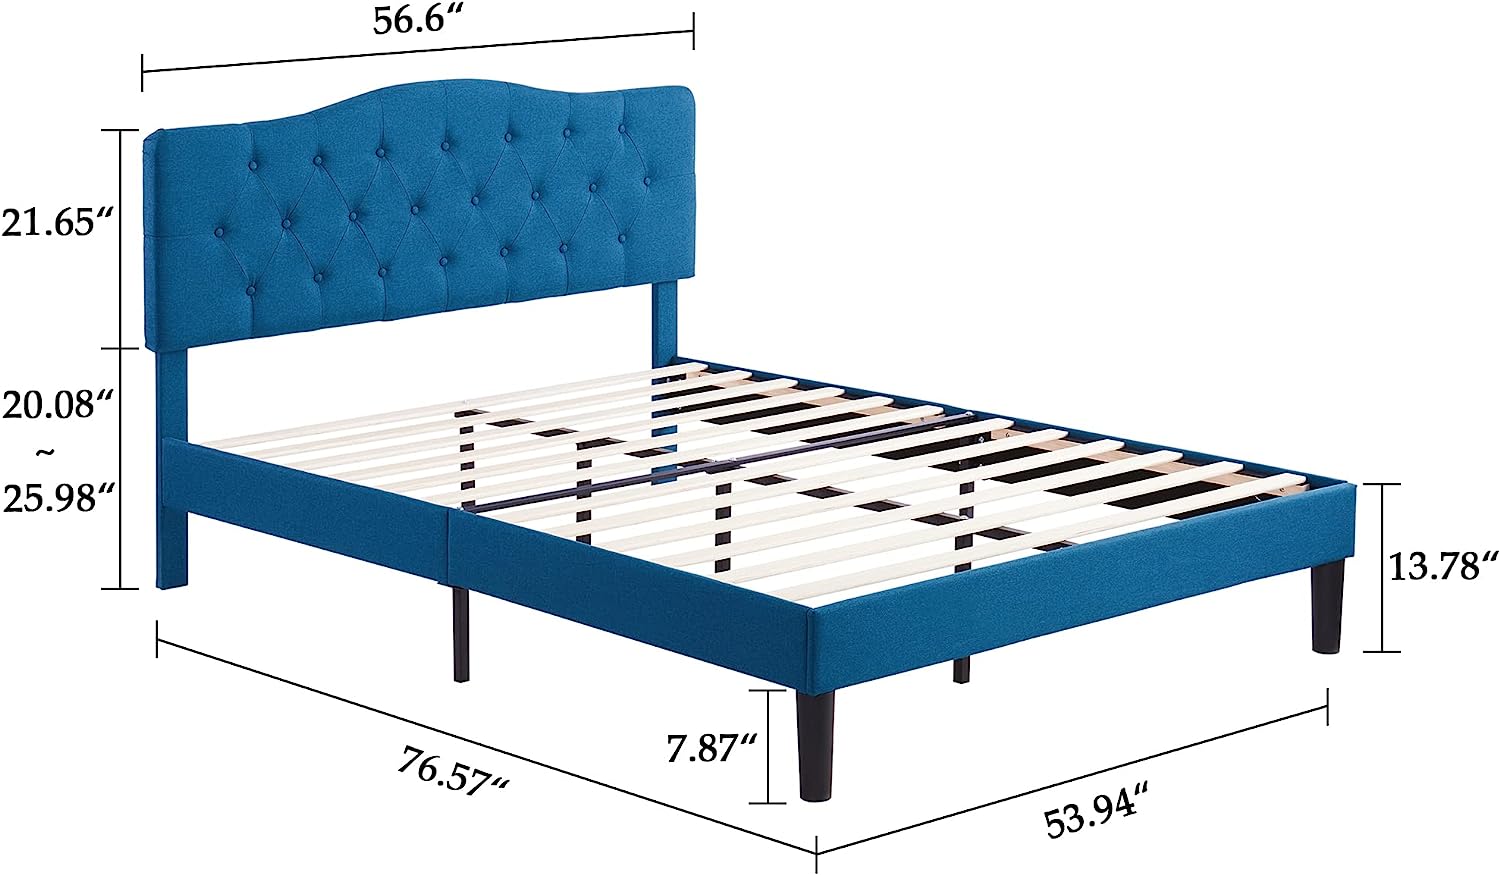 VECELO Classic Grey Upholstered Platform Bed Frame with Diamond Stitched Cloth